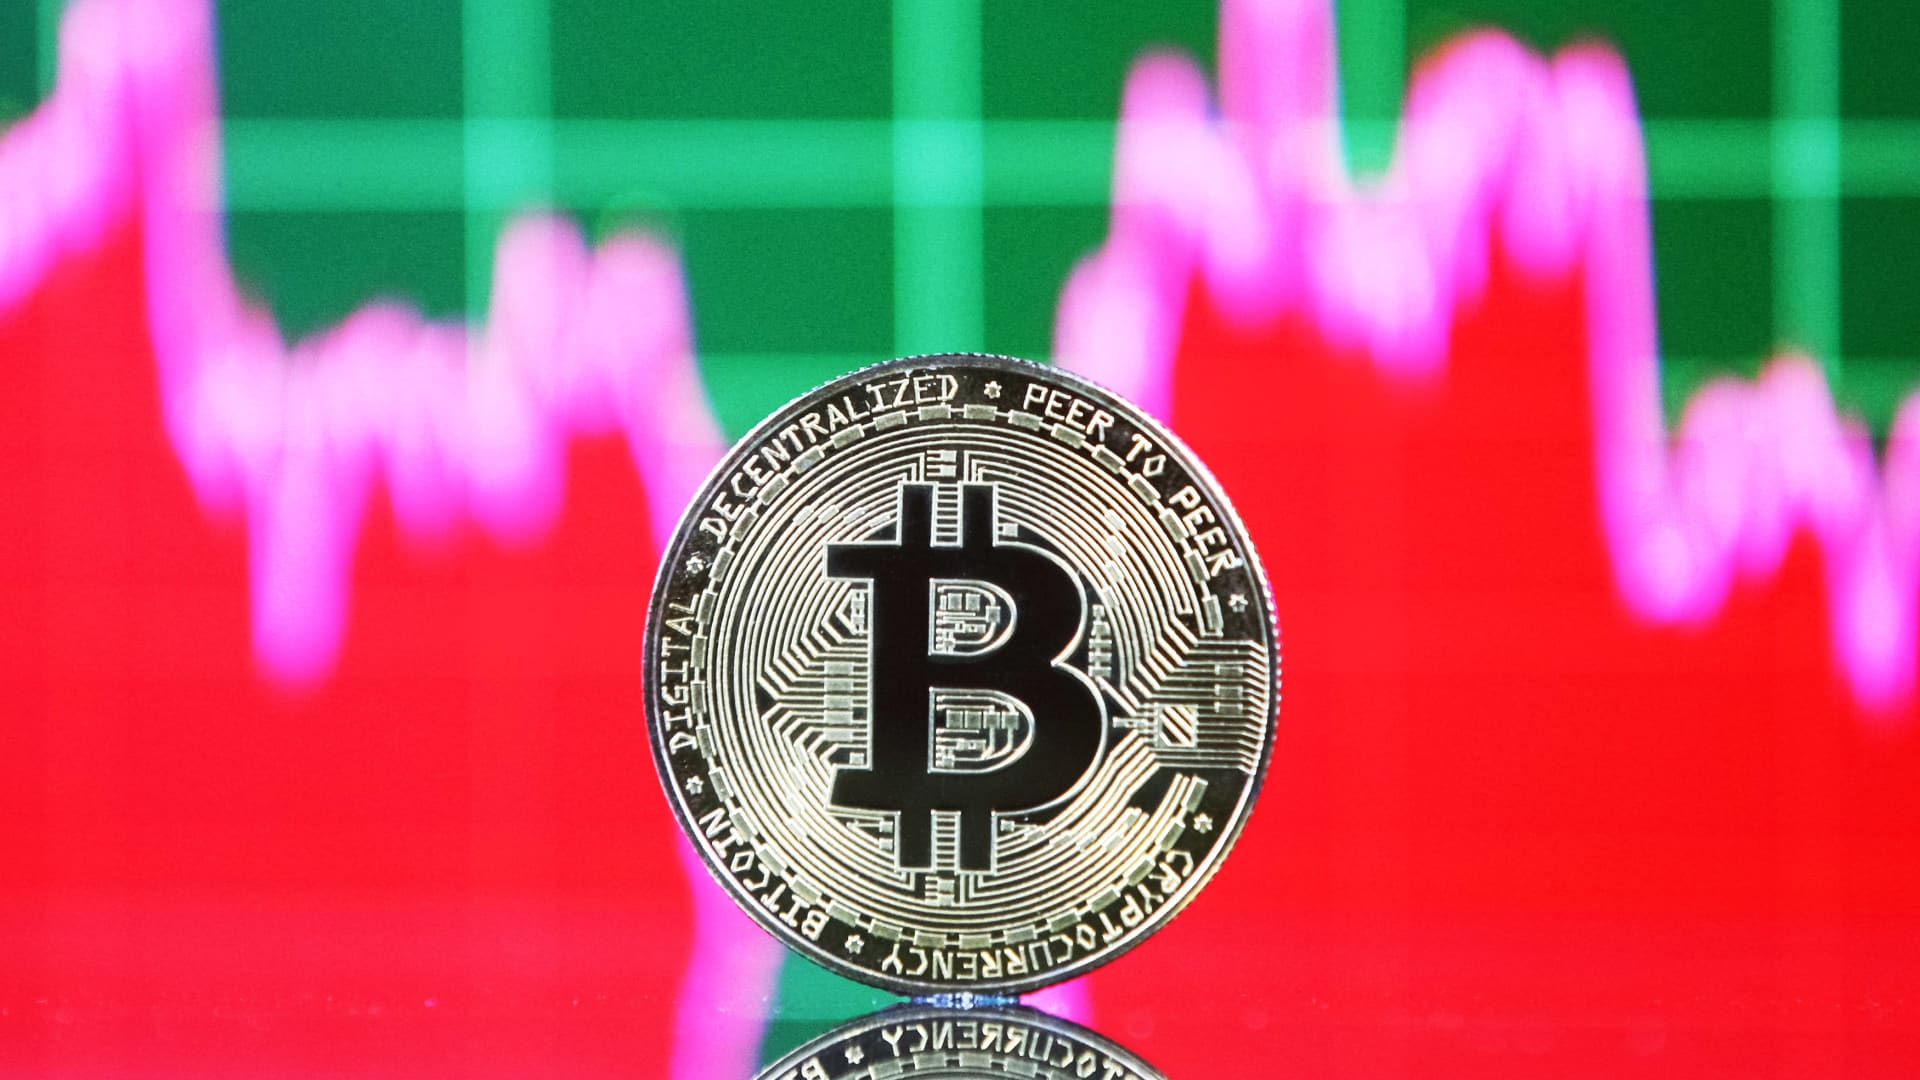 Bitcoin surges 7% to top $20,000, its highest level in more than a week, even as stocks hit 2022 lows - CNBC